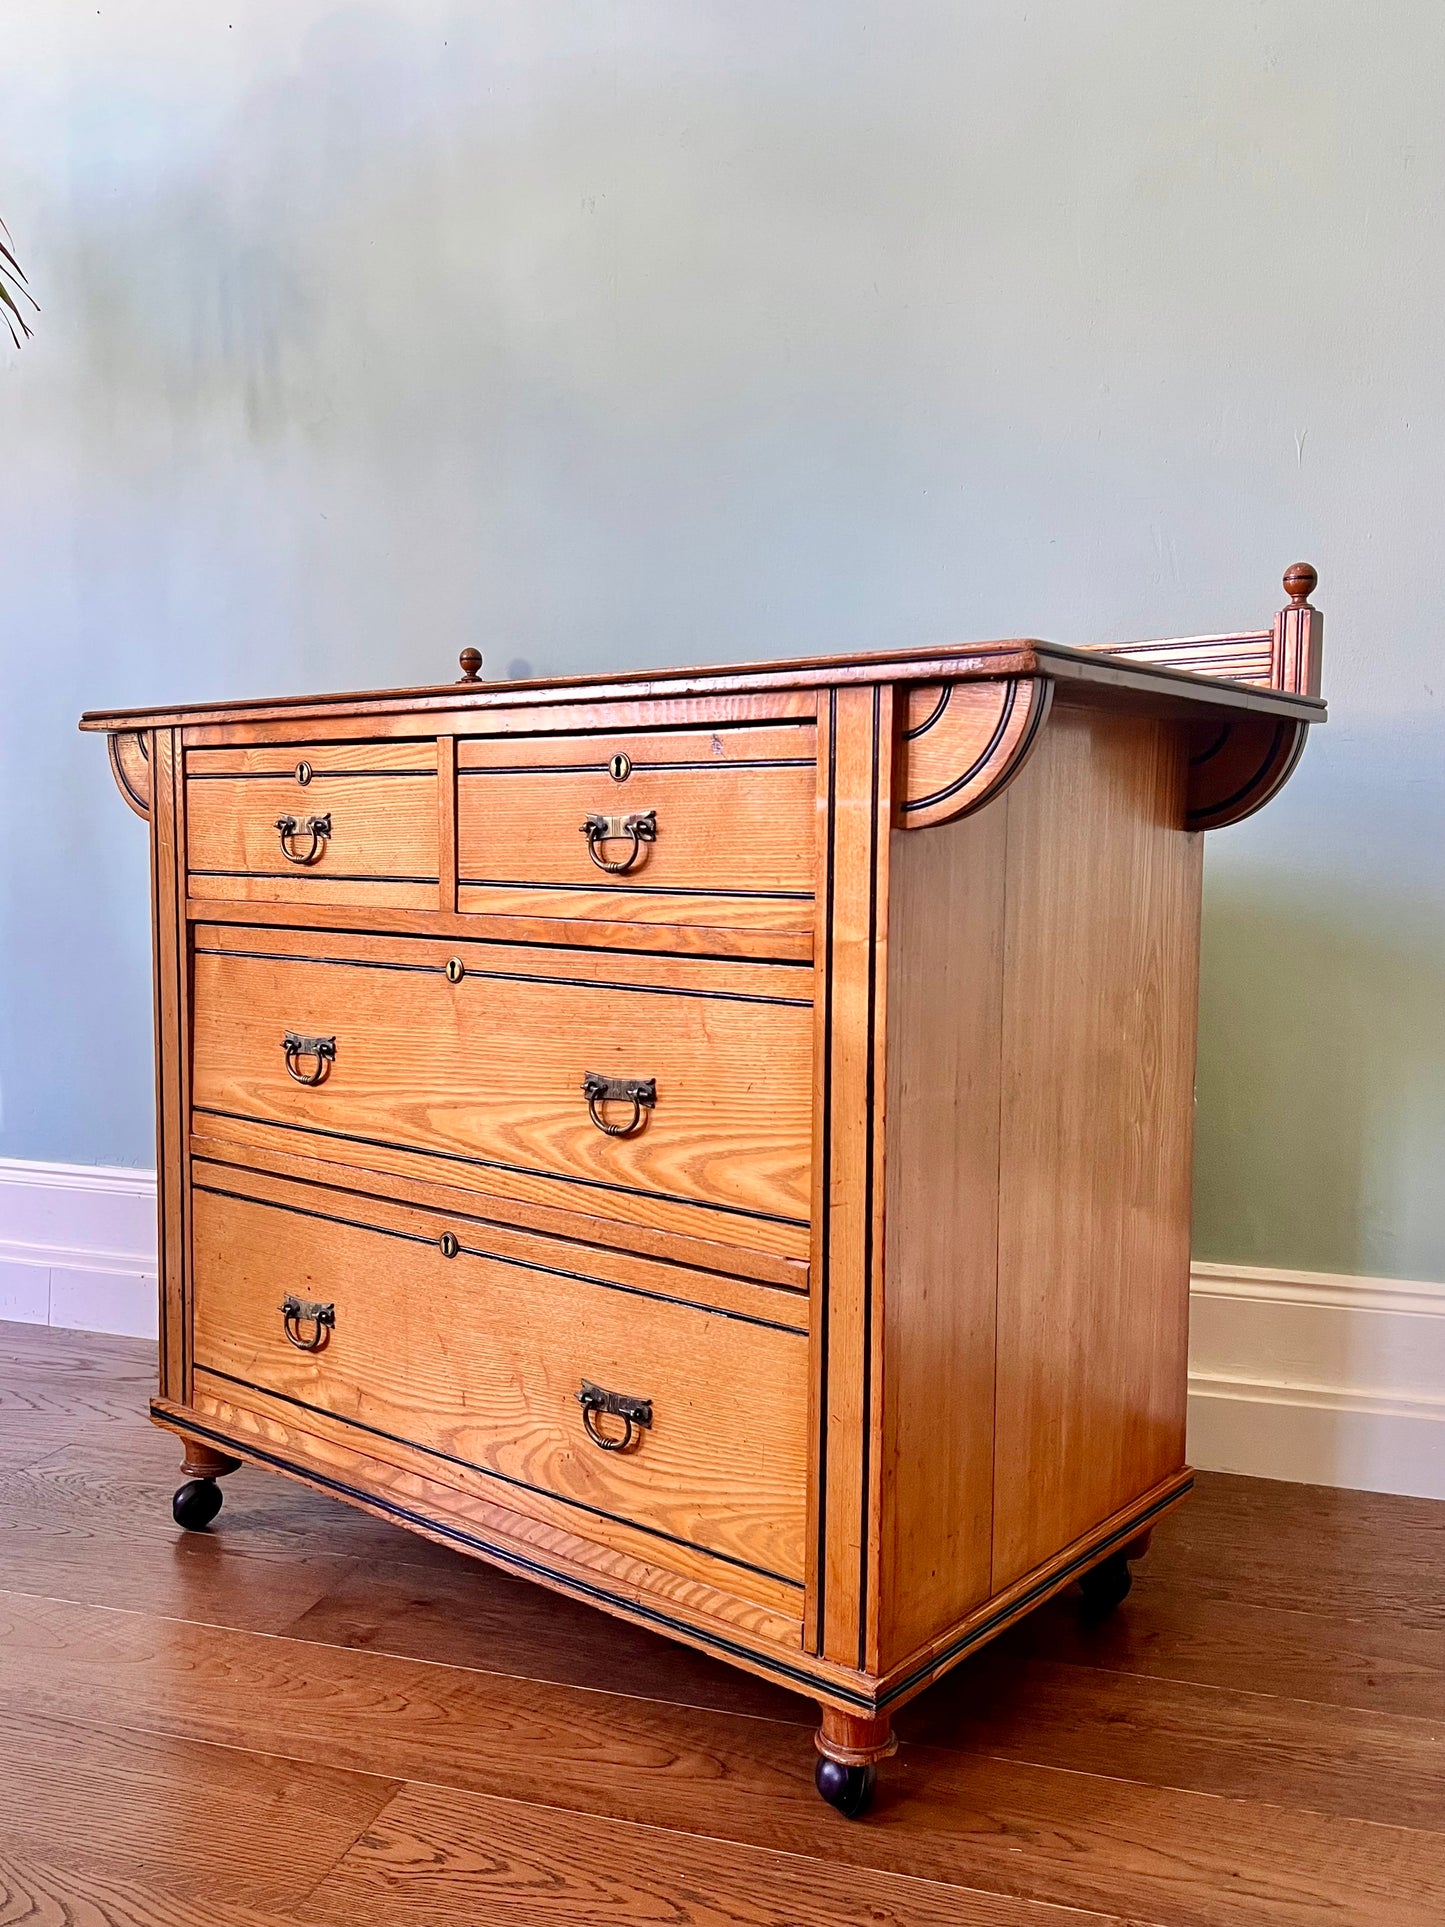 Late C19th Aesthetic Movement Chest of Drawers